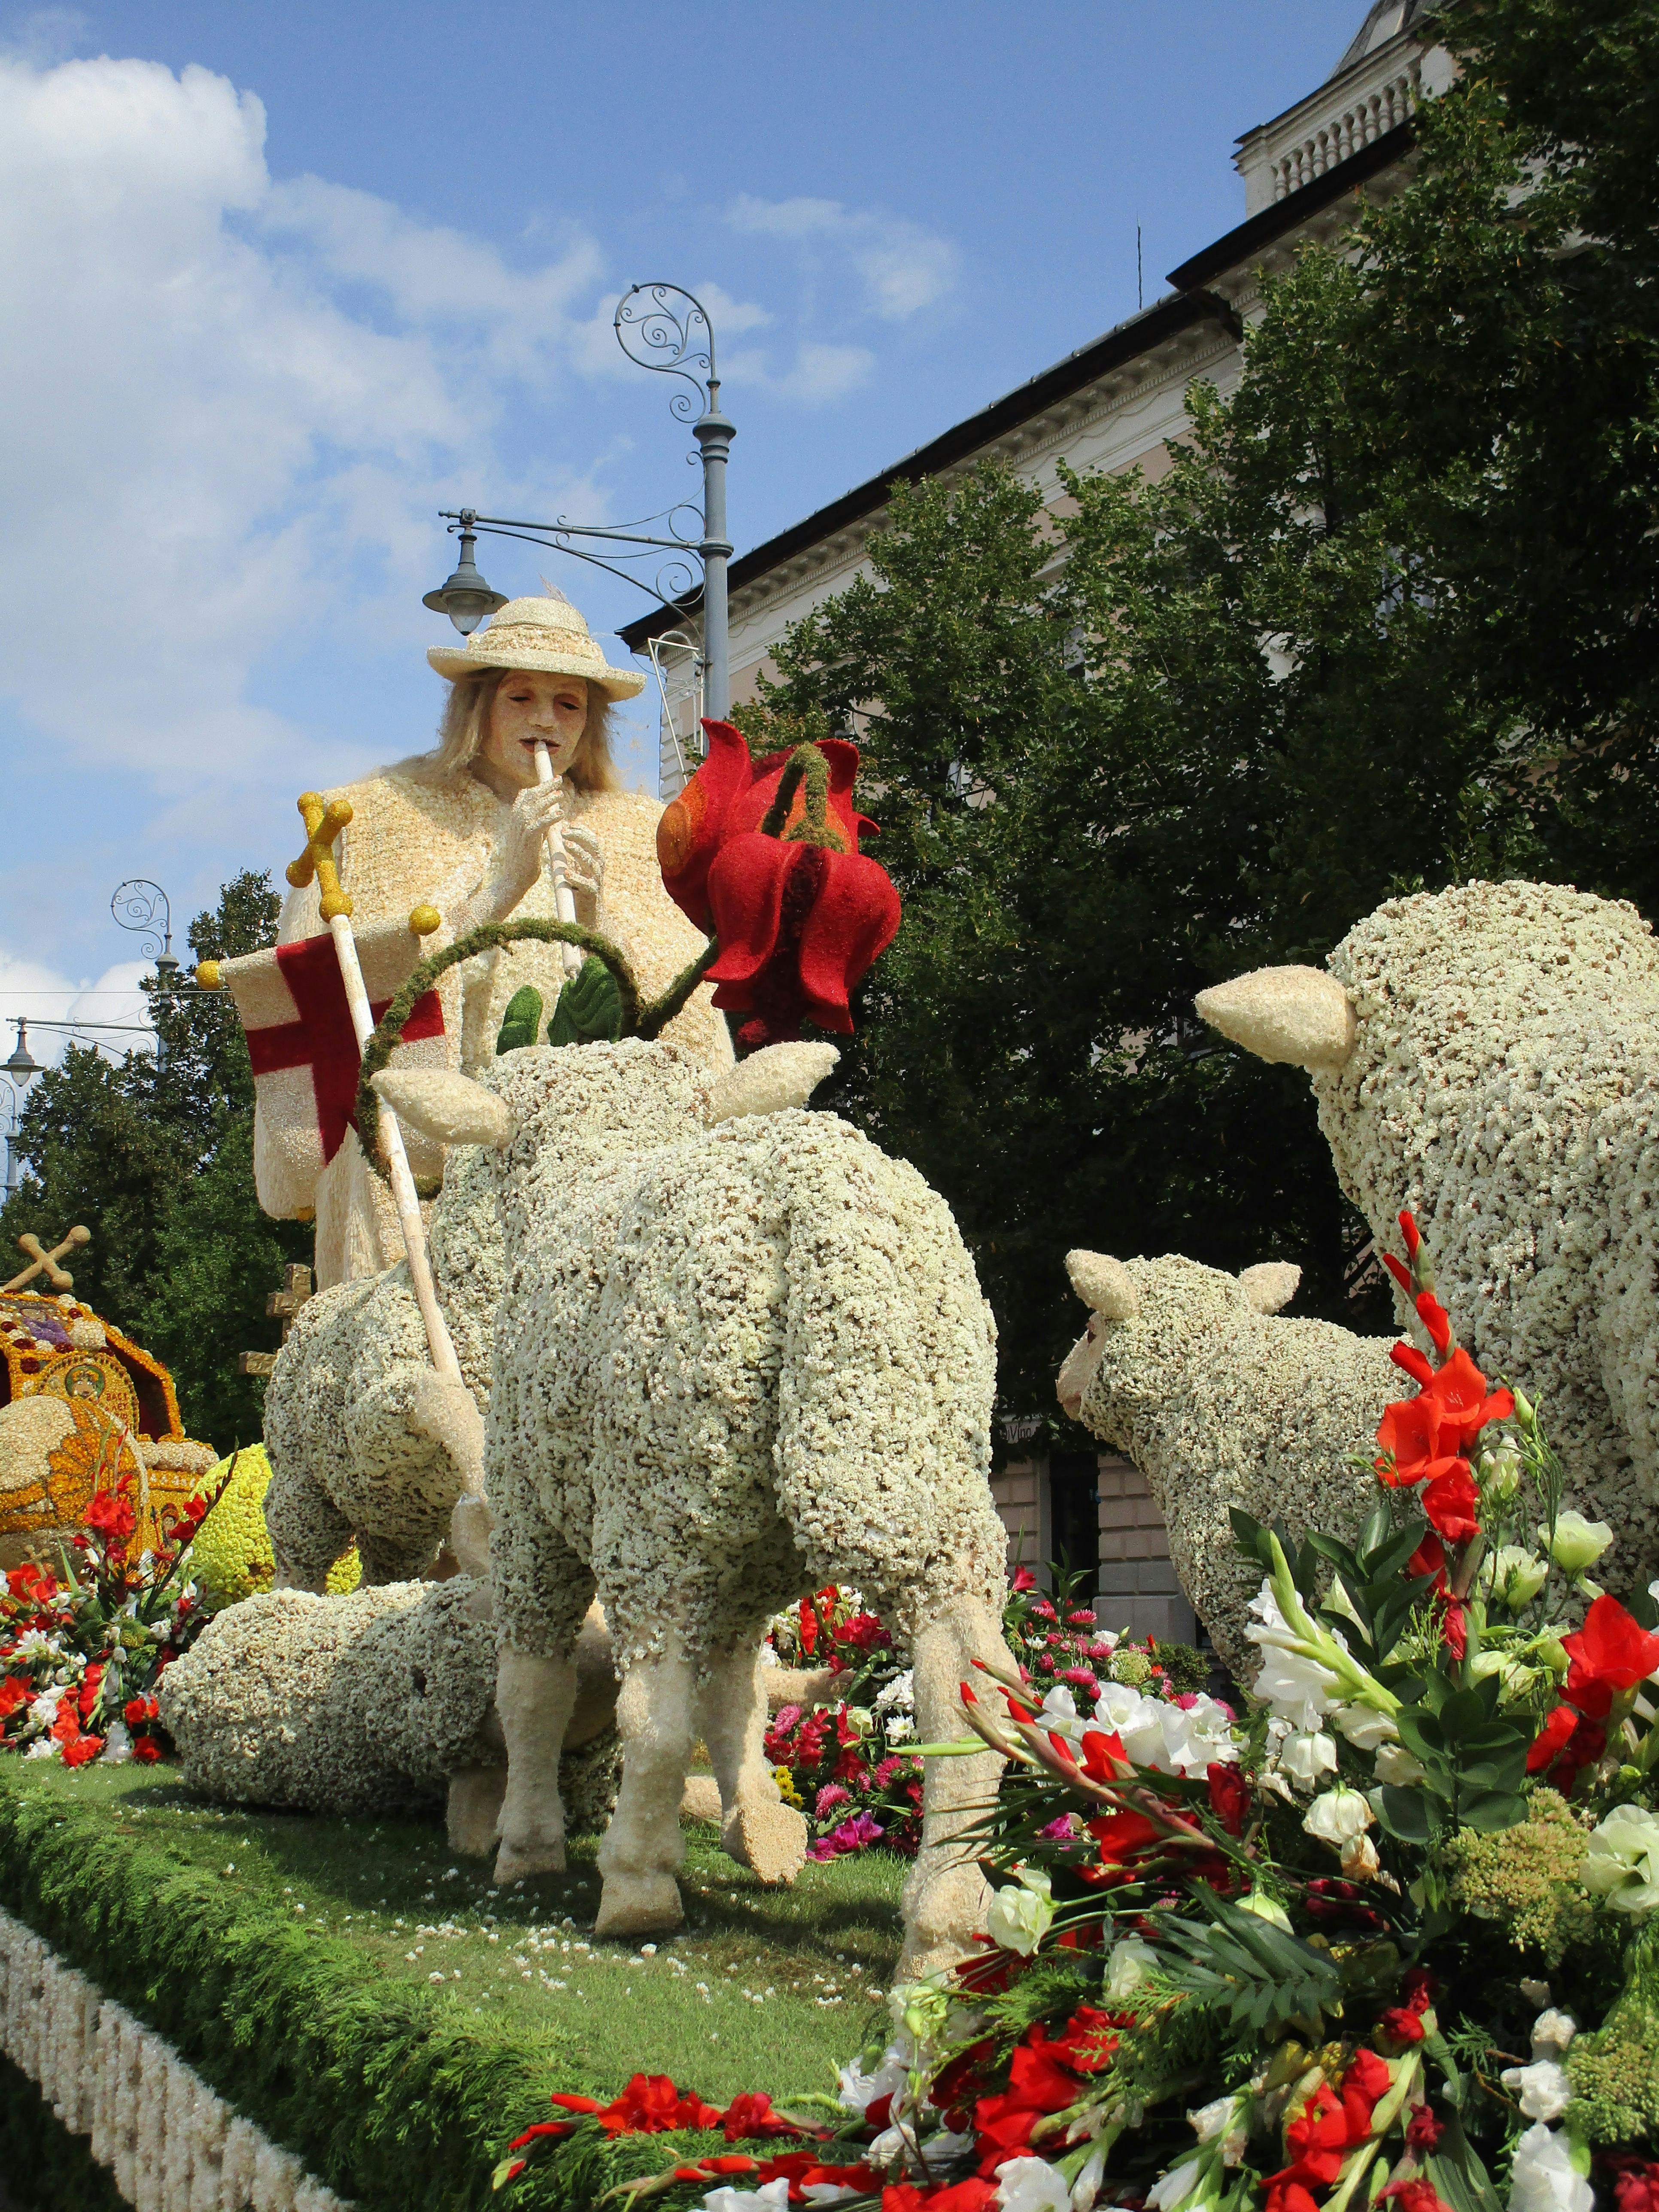 Free stock photo of flower carnival - shepherd and his sheep